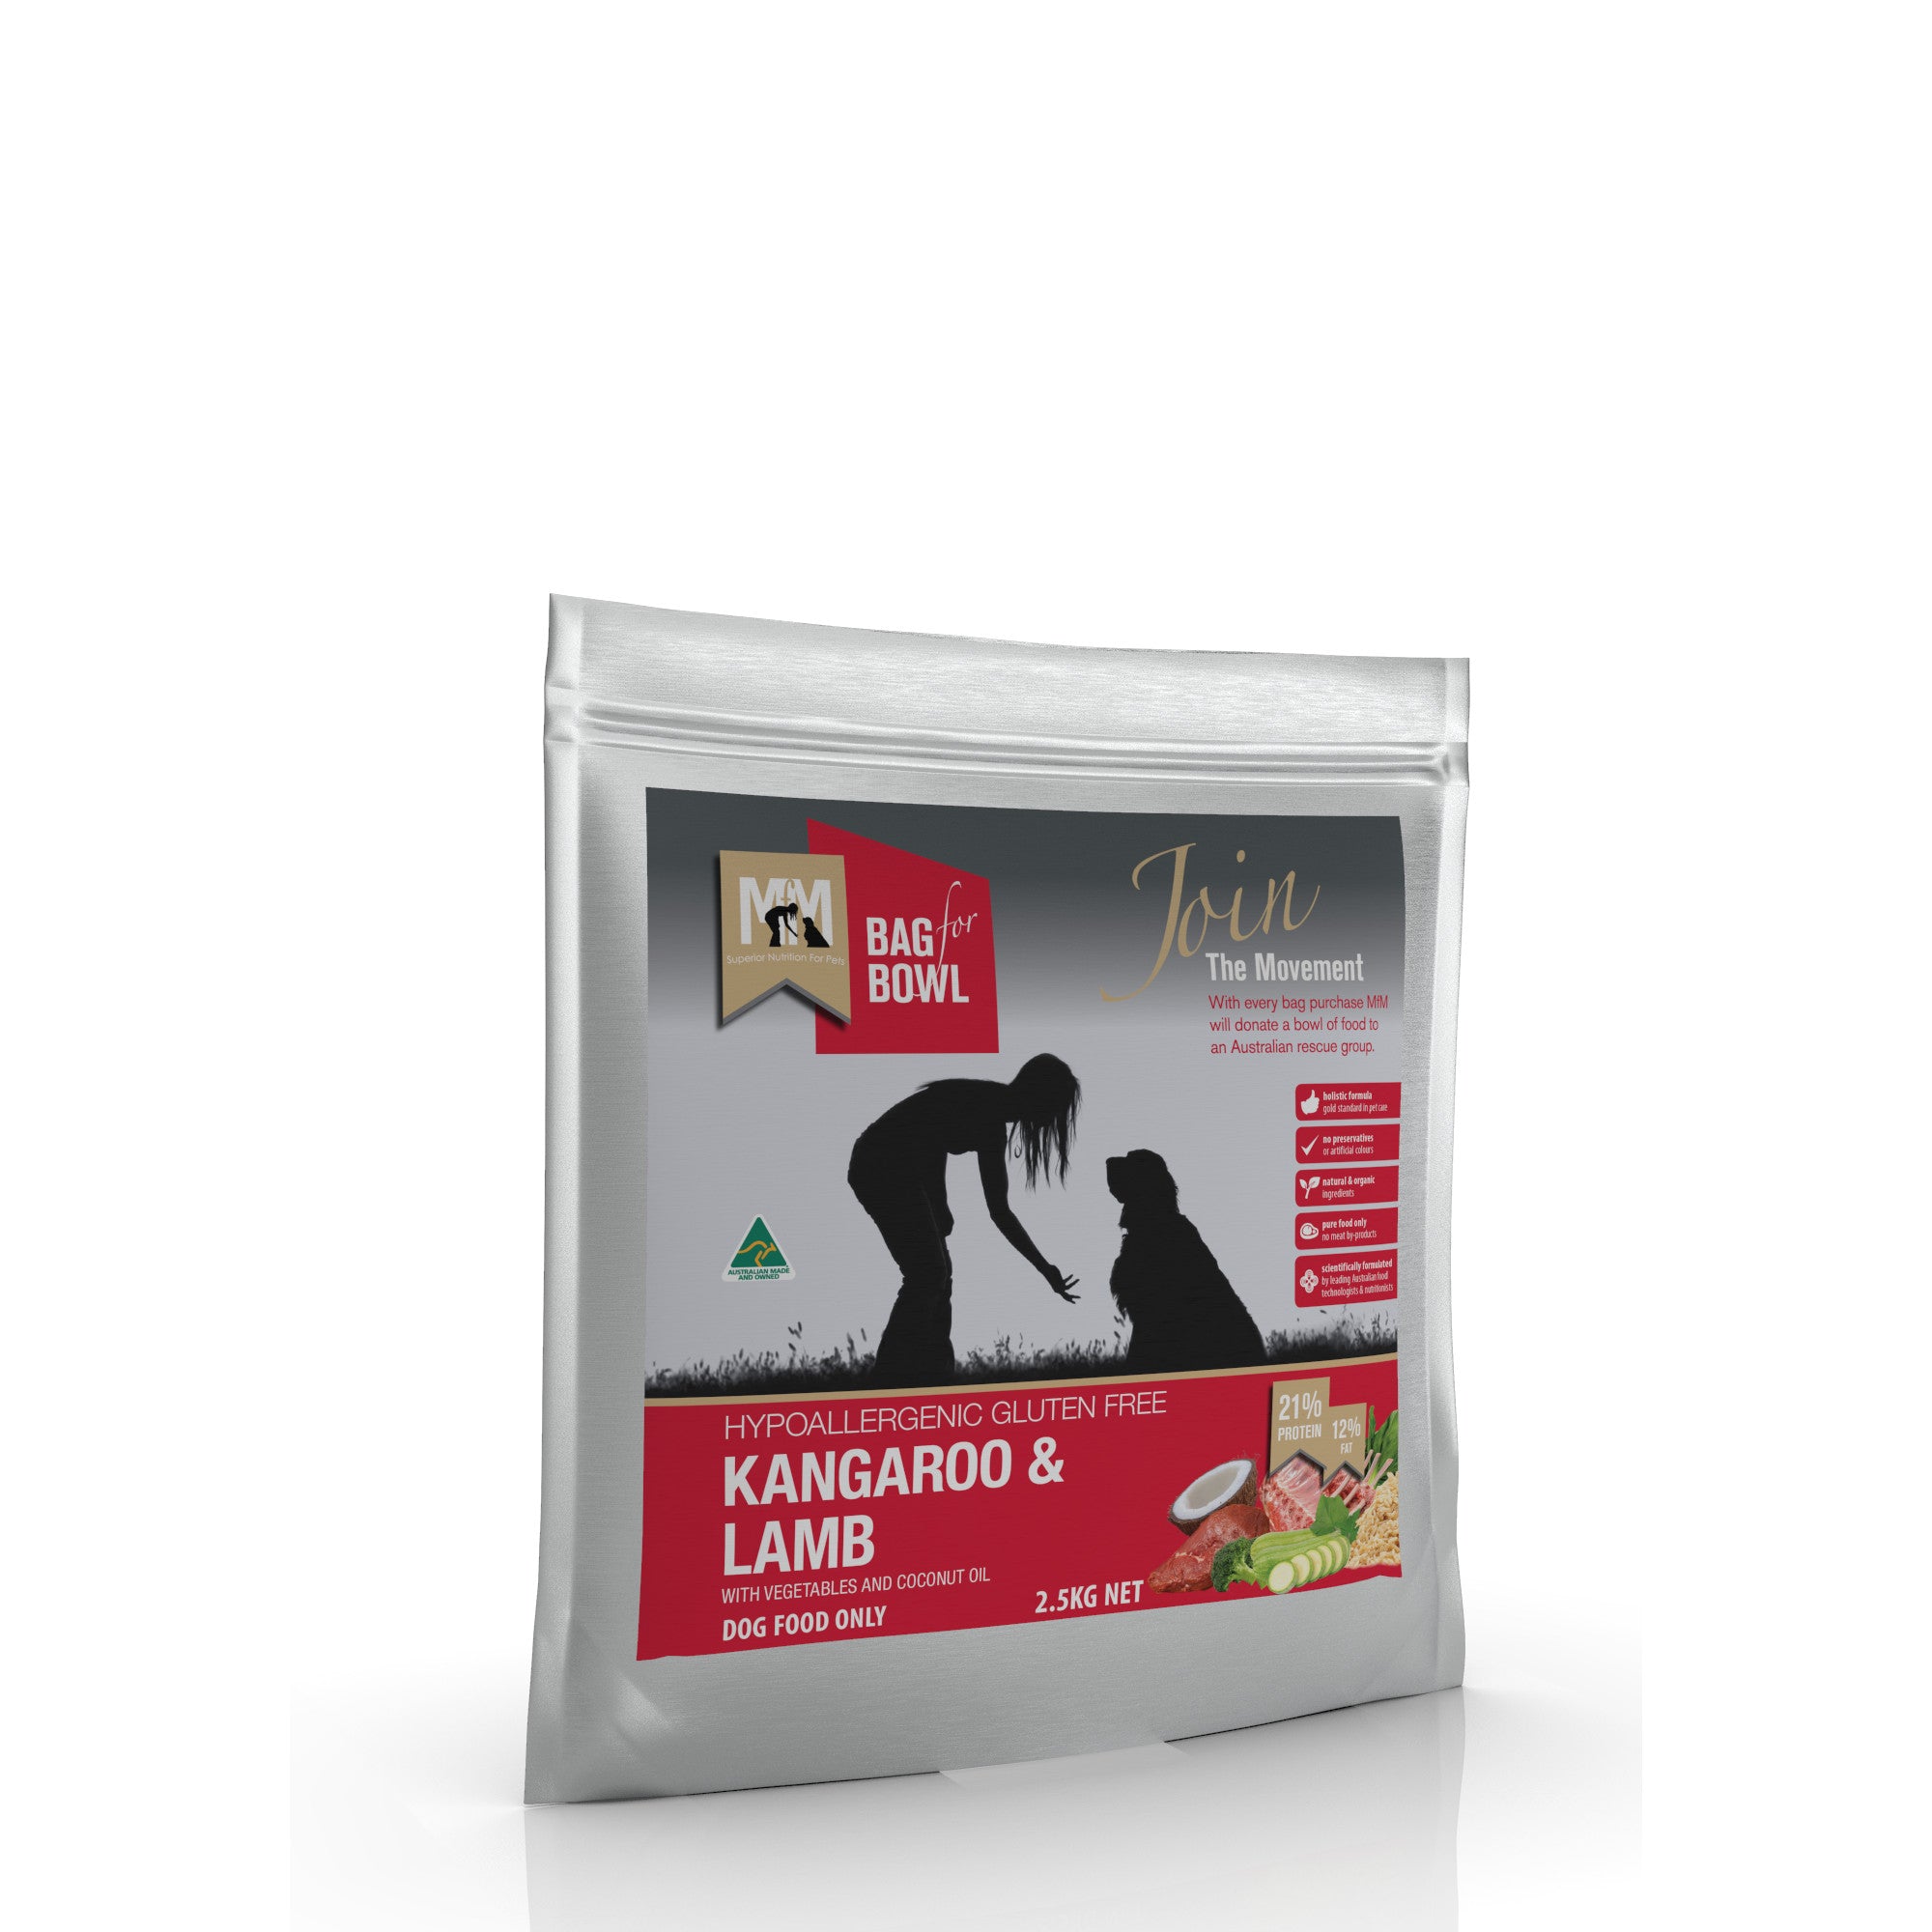 Meals for Mutts Kangaroo and Lamb Dog Food 2.5kg.